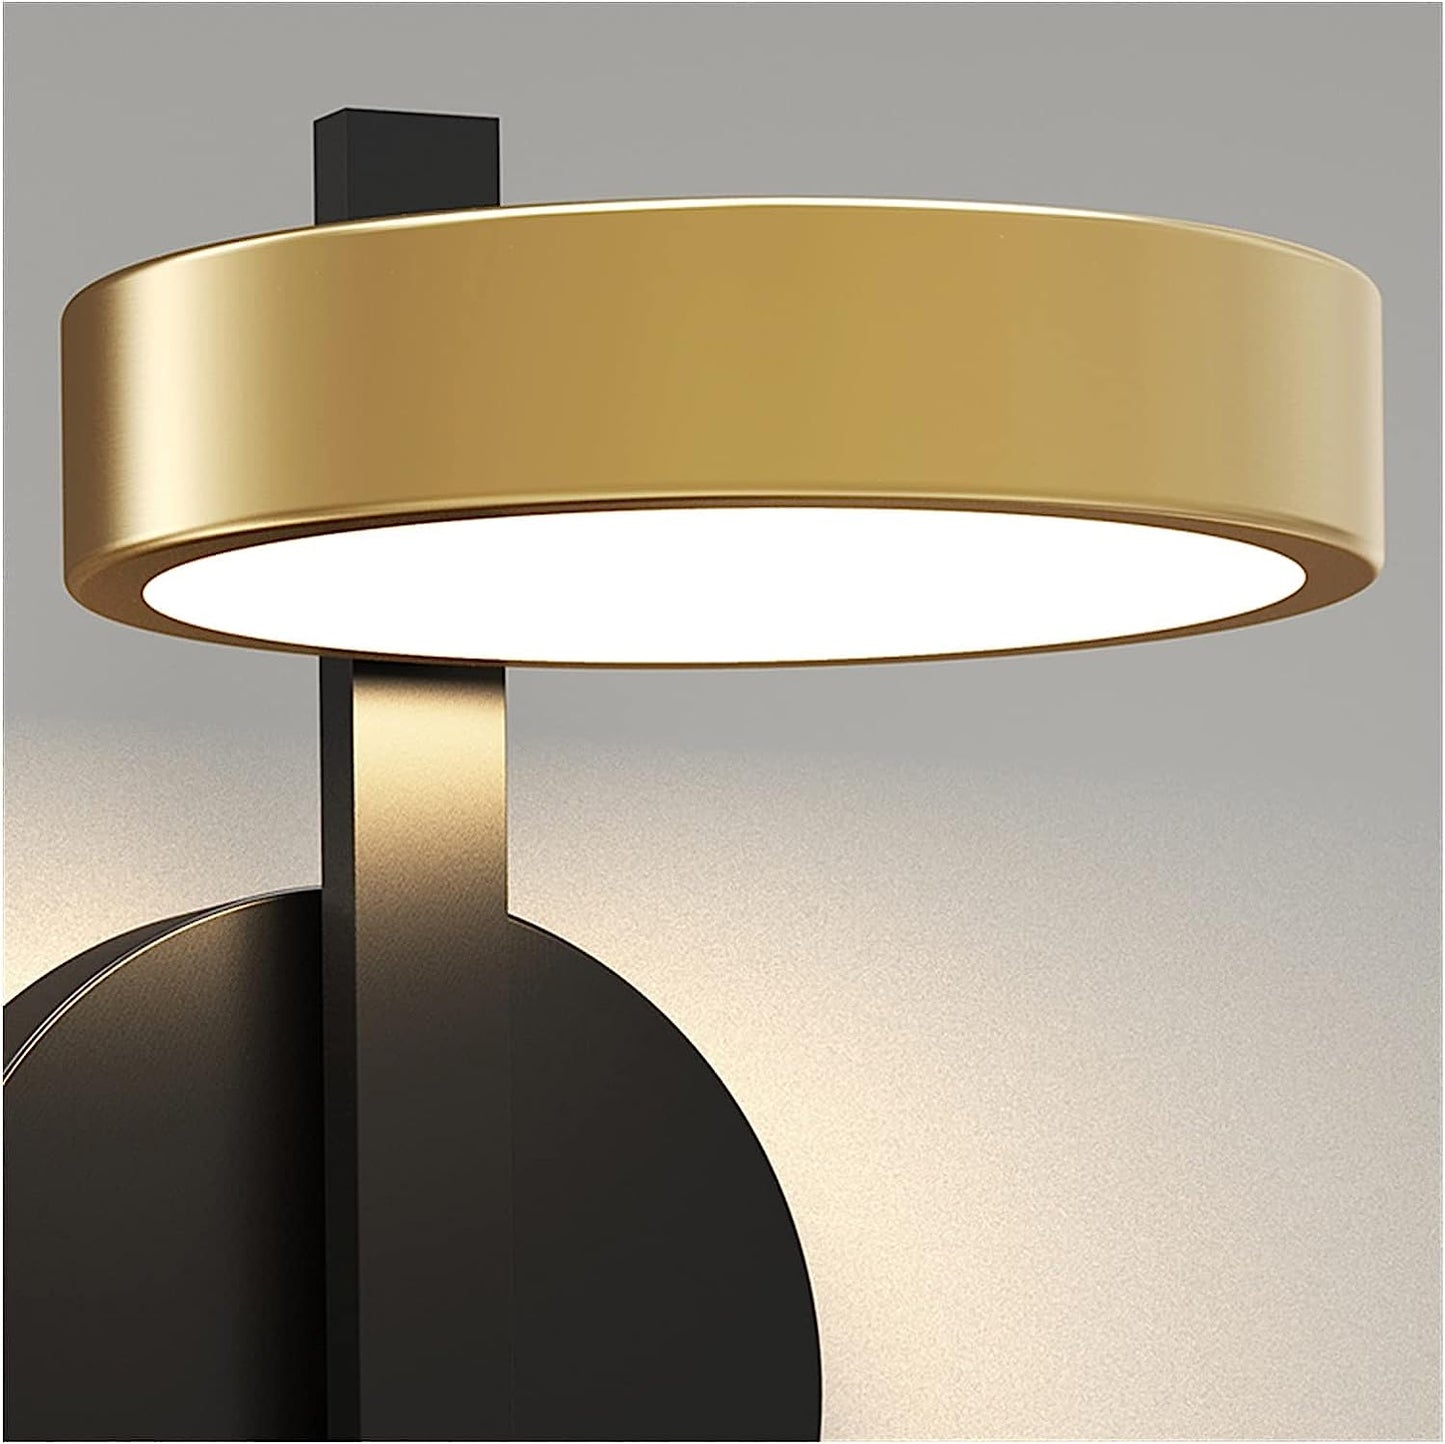 Contemporary Double Focus Wall Lamp